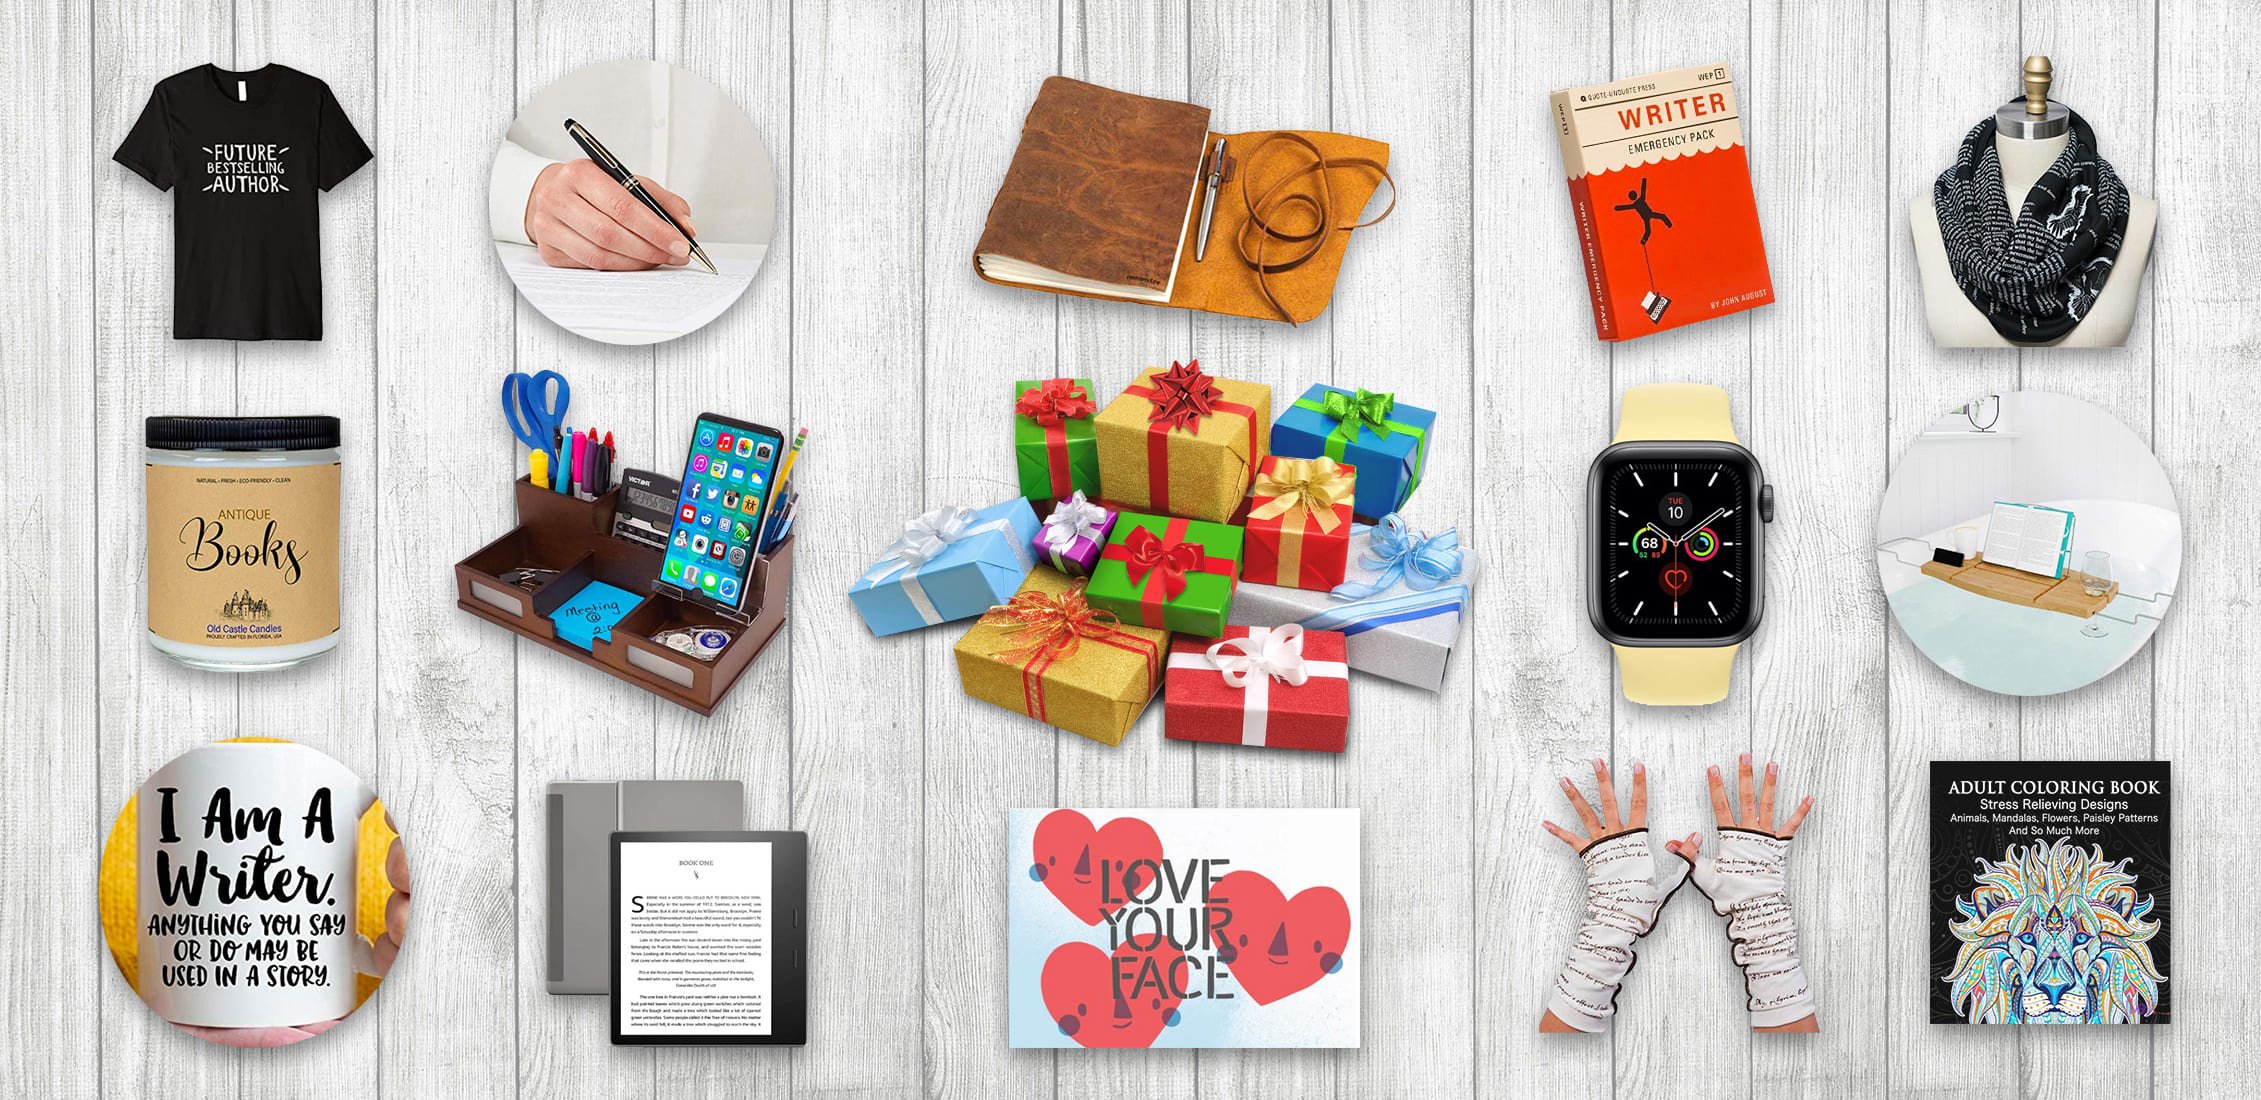 Christmas Gifts for Writers | 55+ Best Gifts for Writers in 2021: New